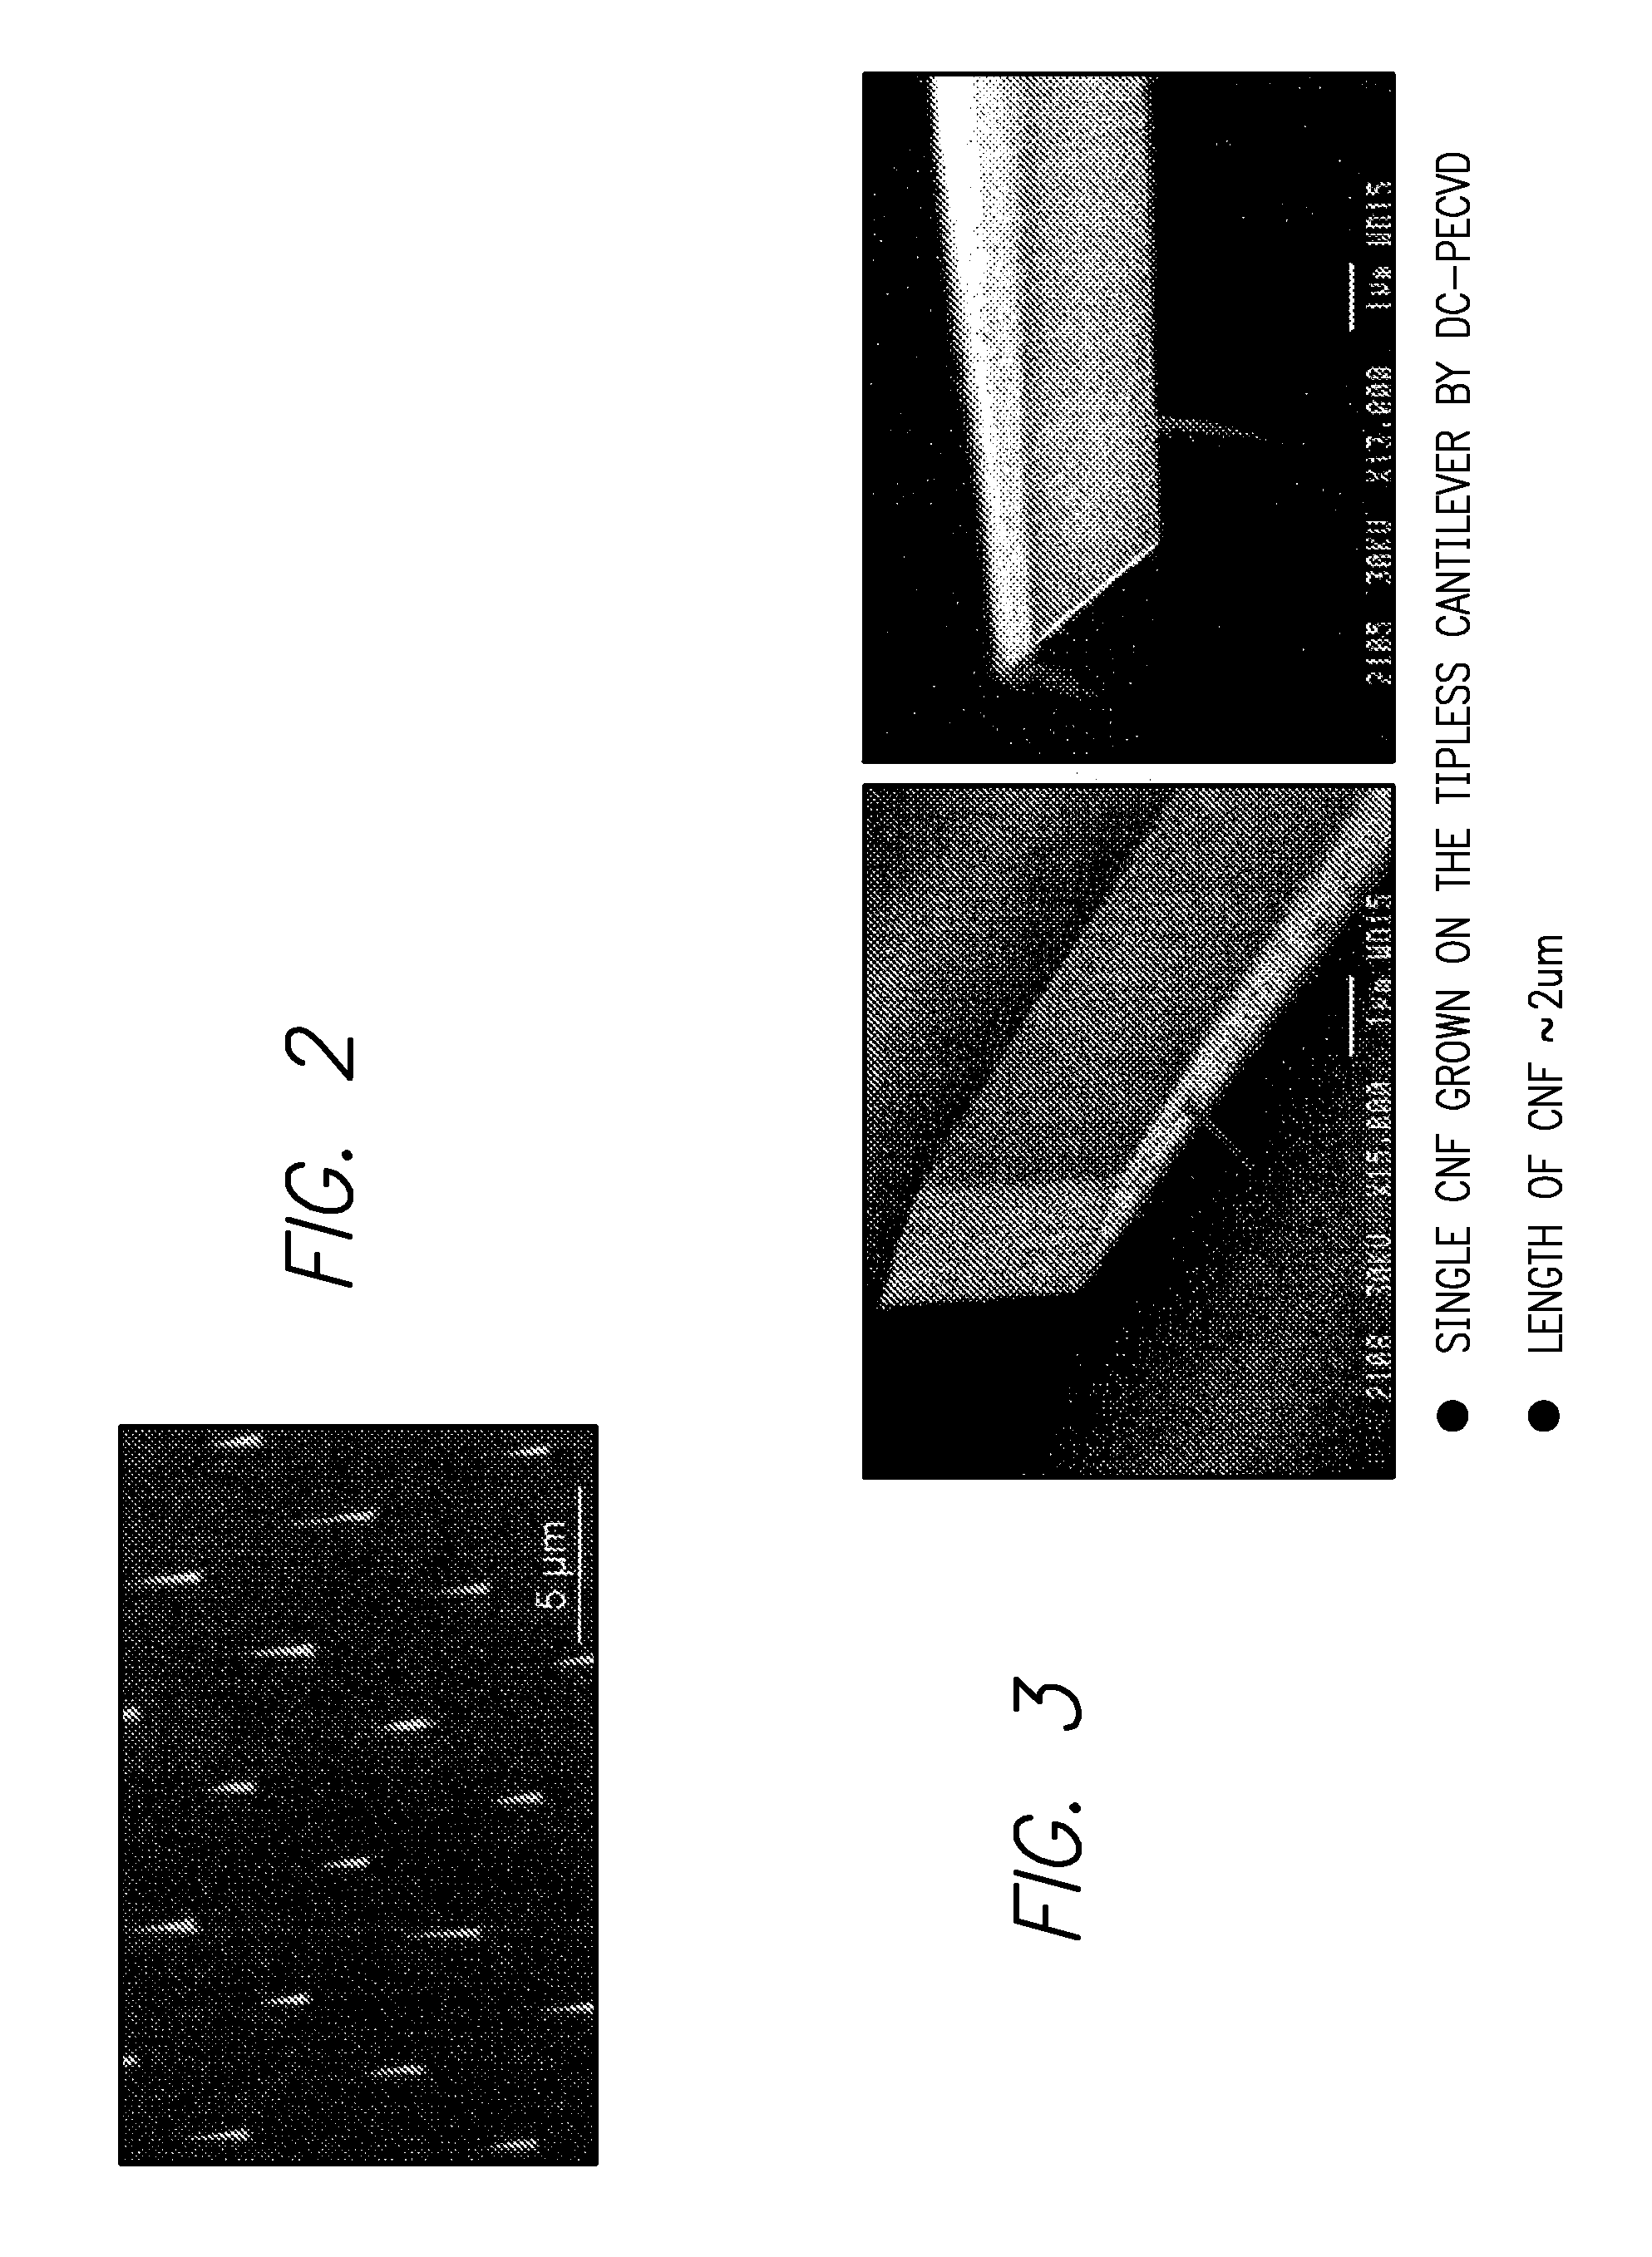 Probe system comprising an electric-field-aligned probe tip and method for fabricating the same